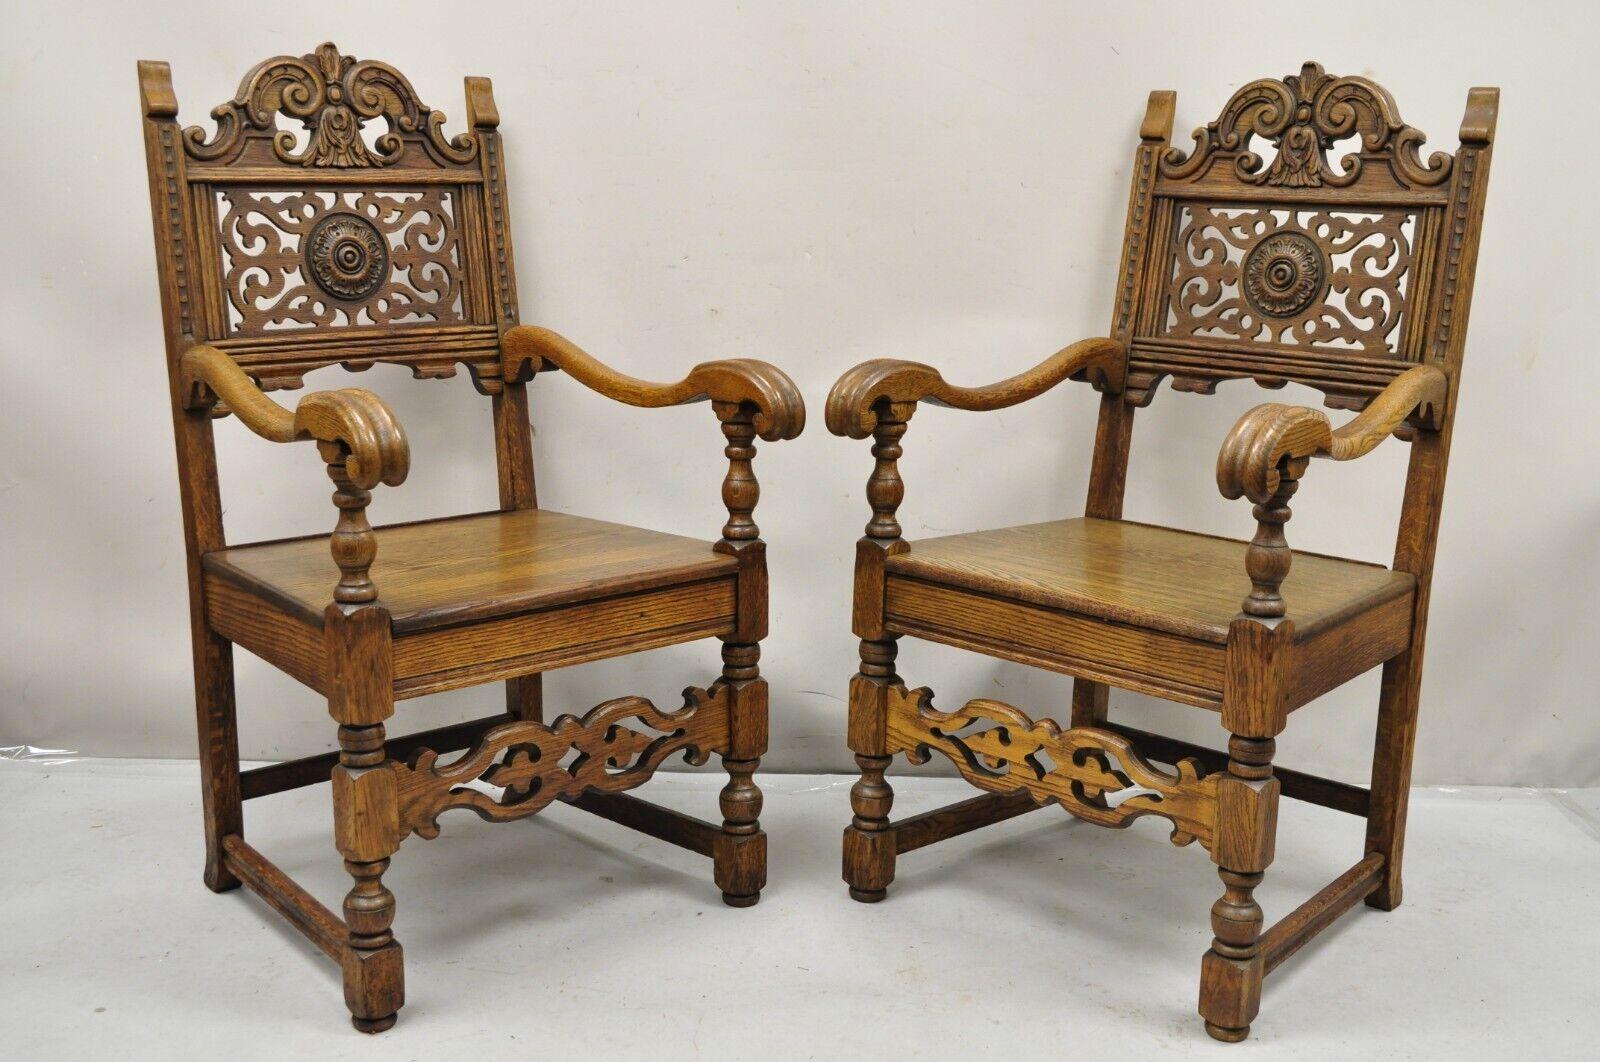 Antique Vanleigh Furniture New York Carved Oak Italian Renaissance Style Throne Arm Chairs - a Pair. Item features the original label, solid oak wood construction, beautiful woodgrain, very nice antique pair. Circa Early 1900s. Measurements: 42.5